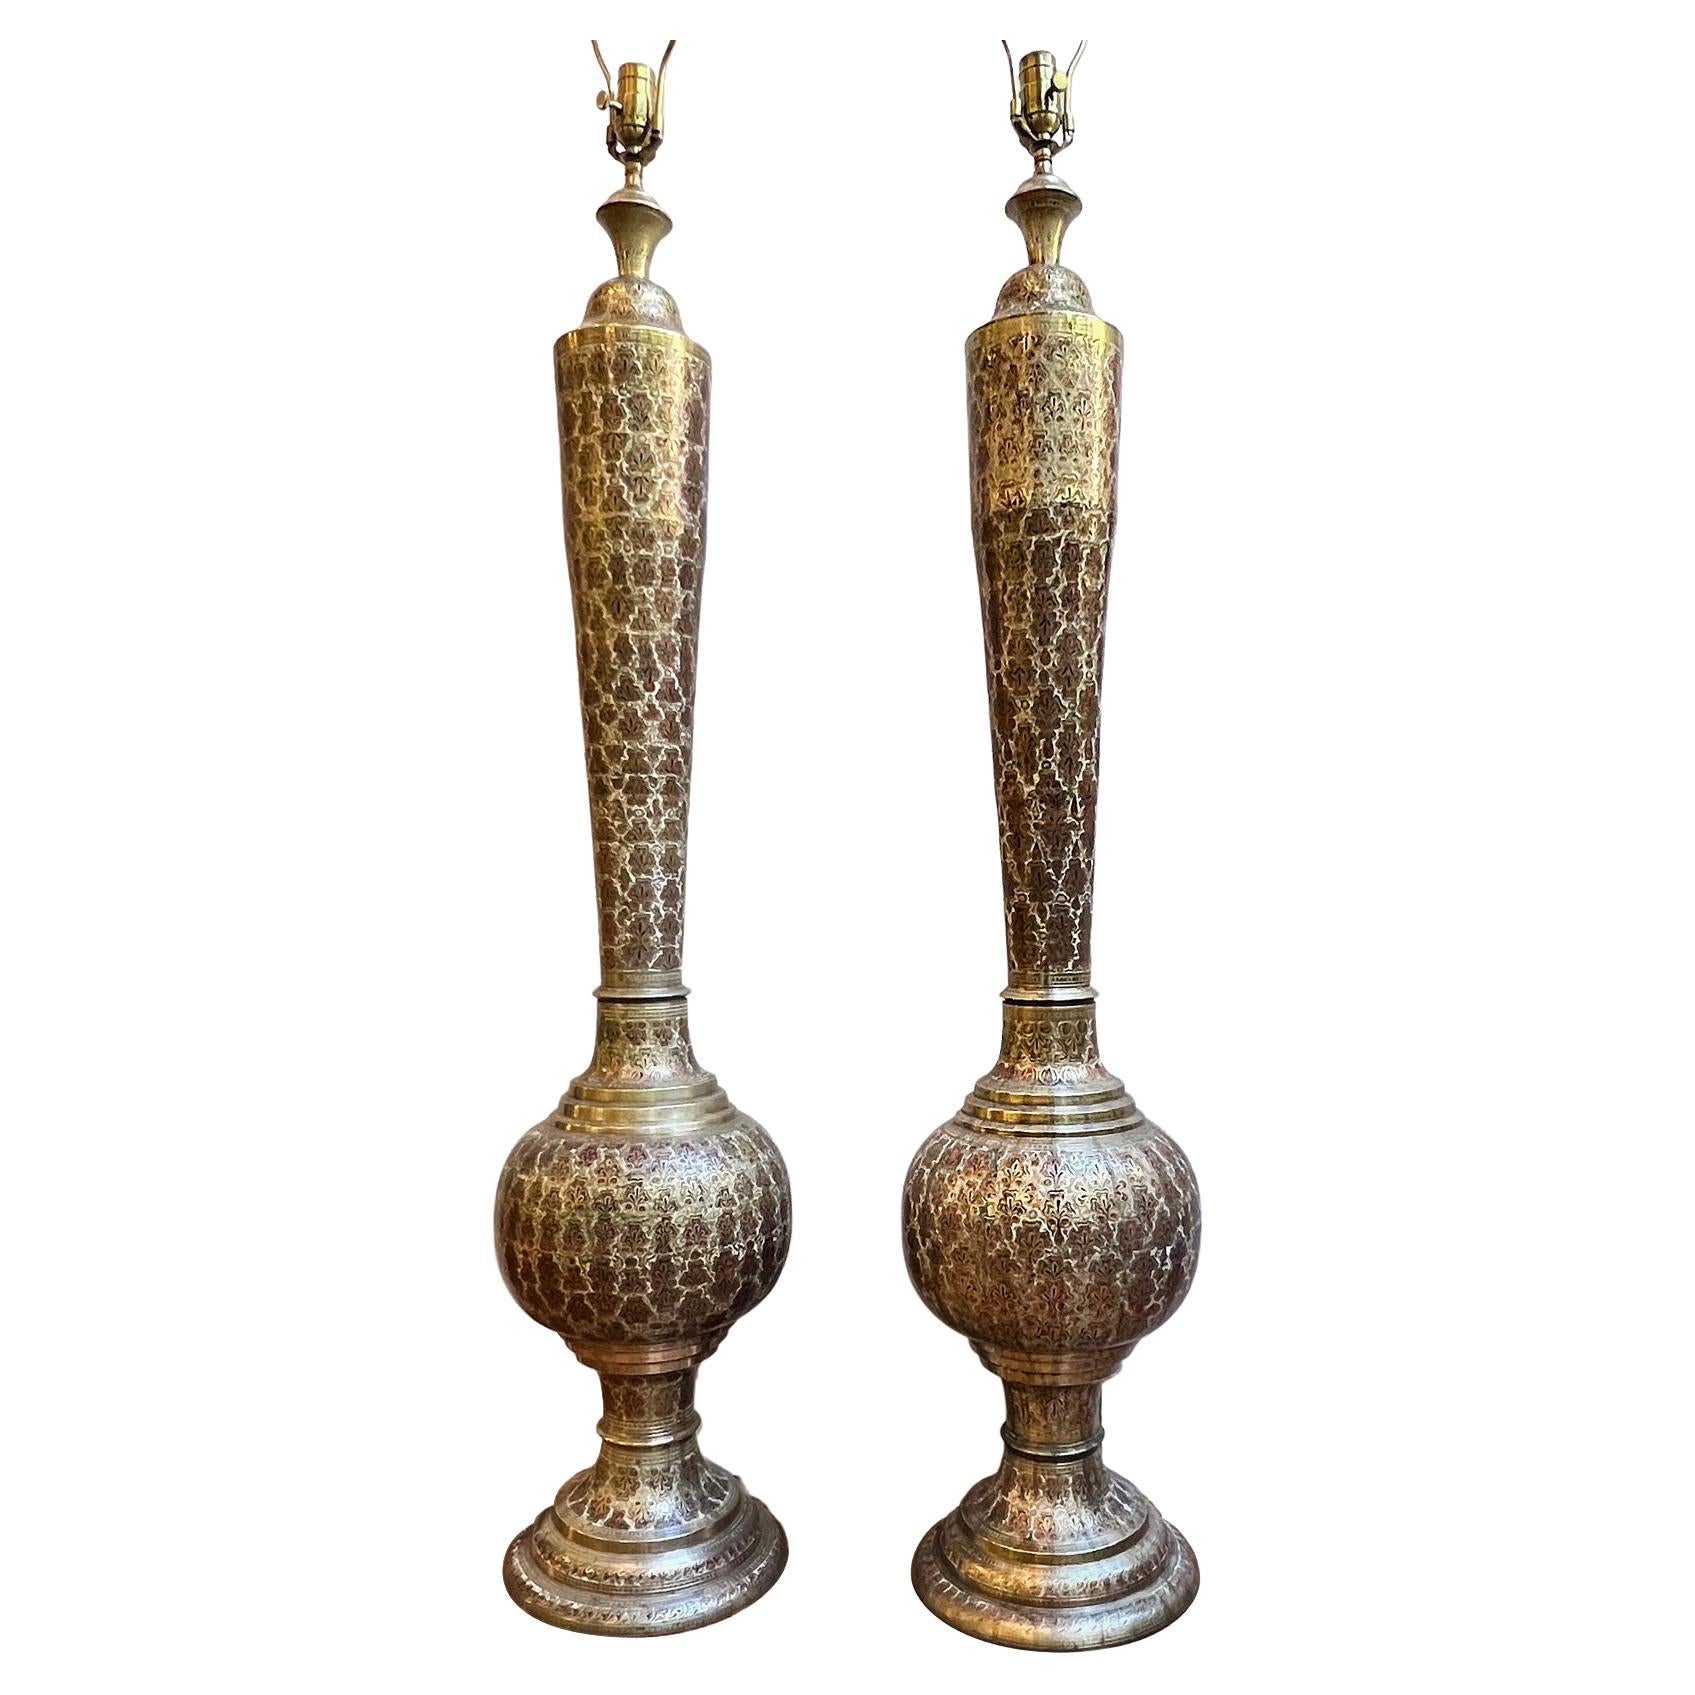 Pair of Enammeled Bronze Table Lamps